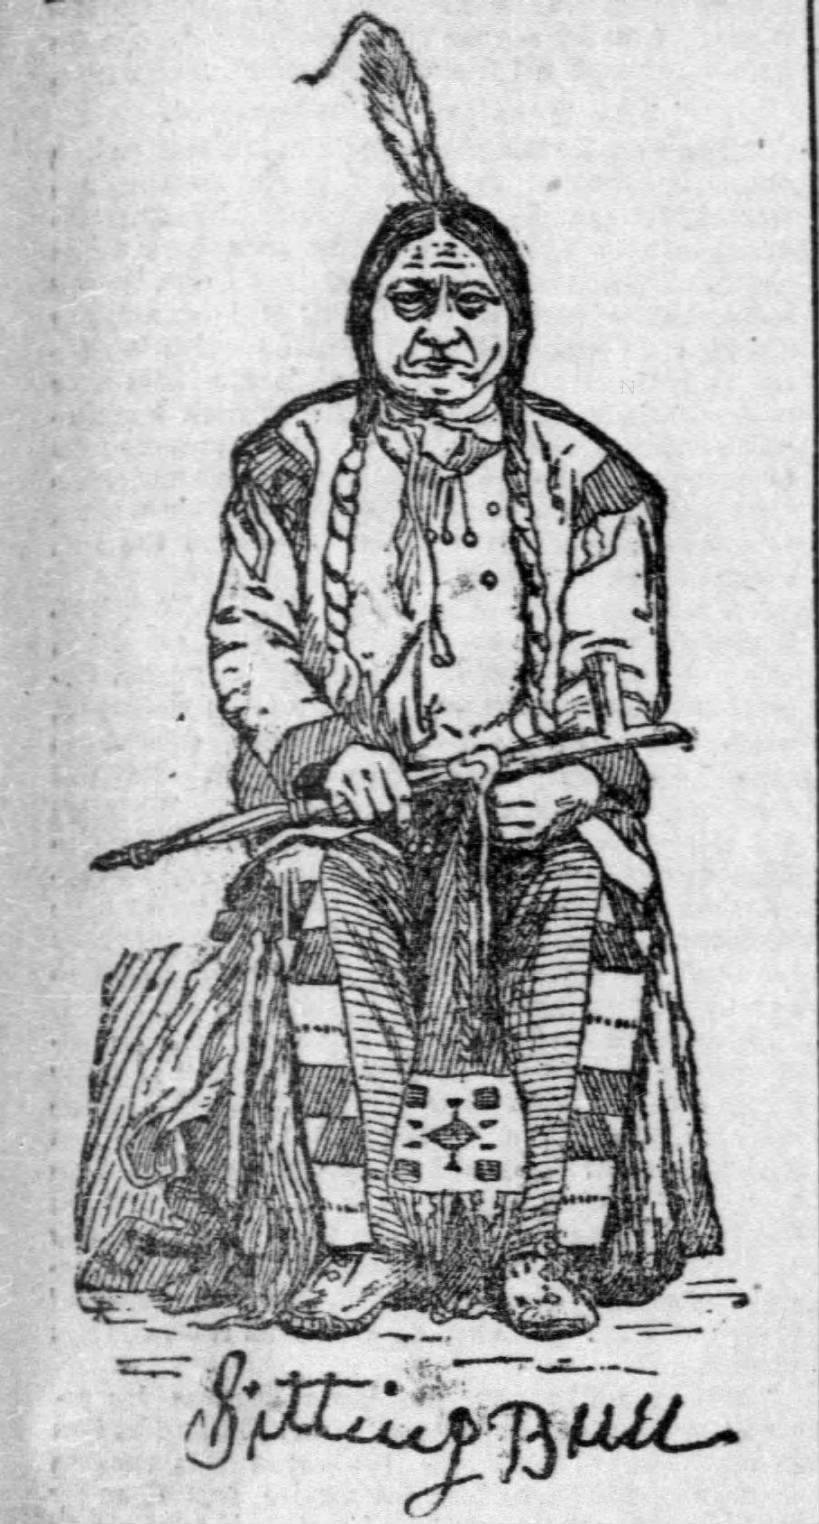 Drawing of Sitting Bull published the day after his death on December 15, 1890